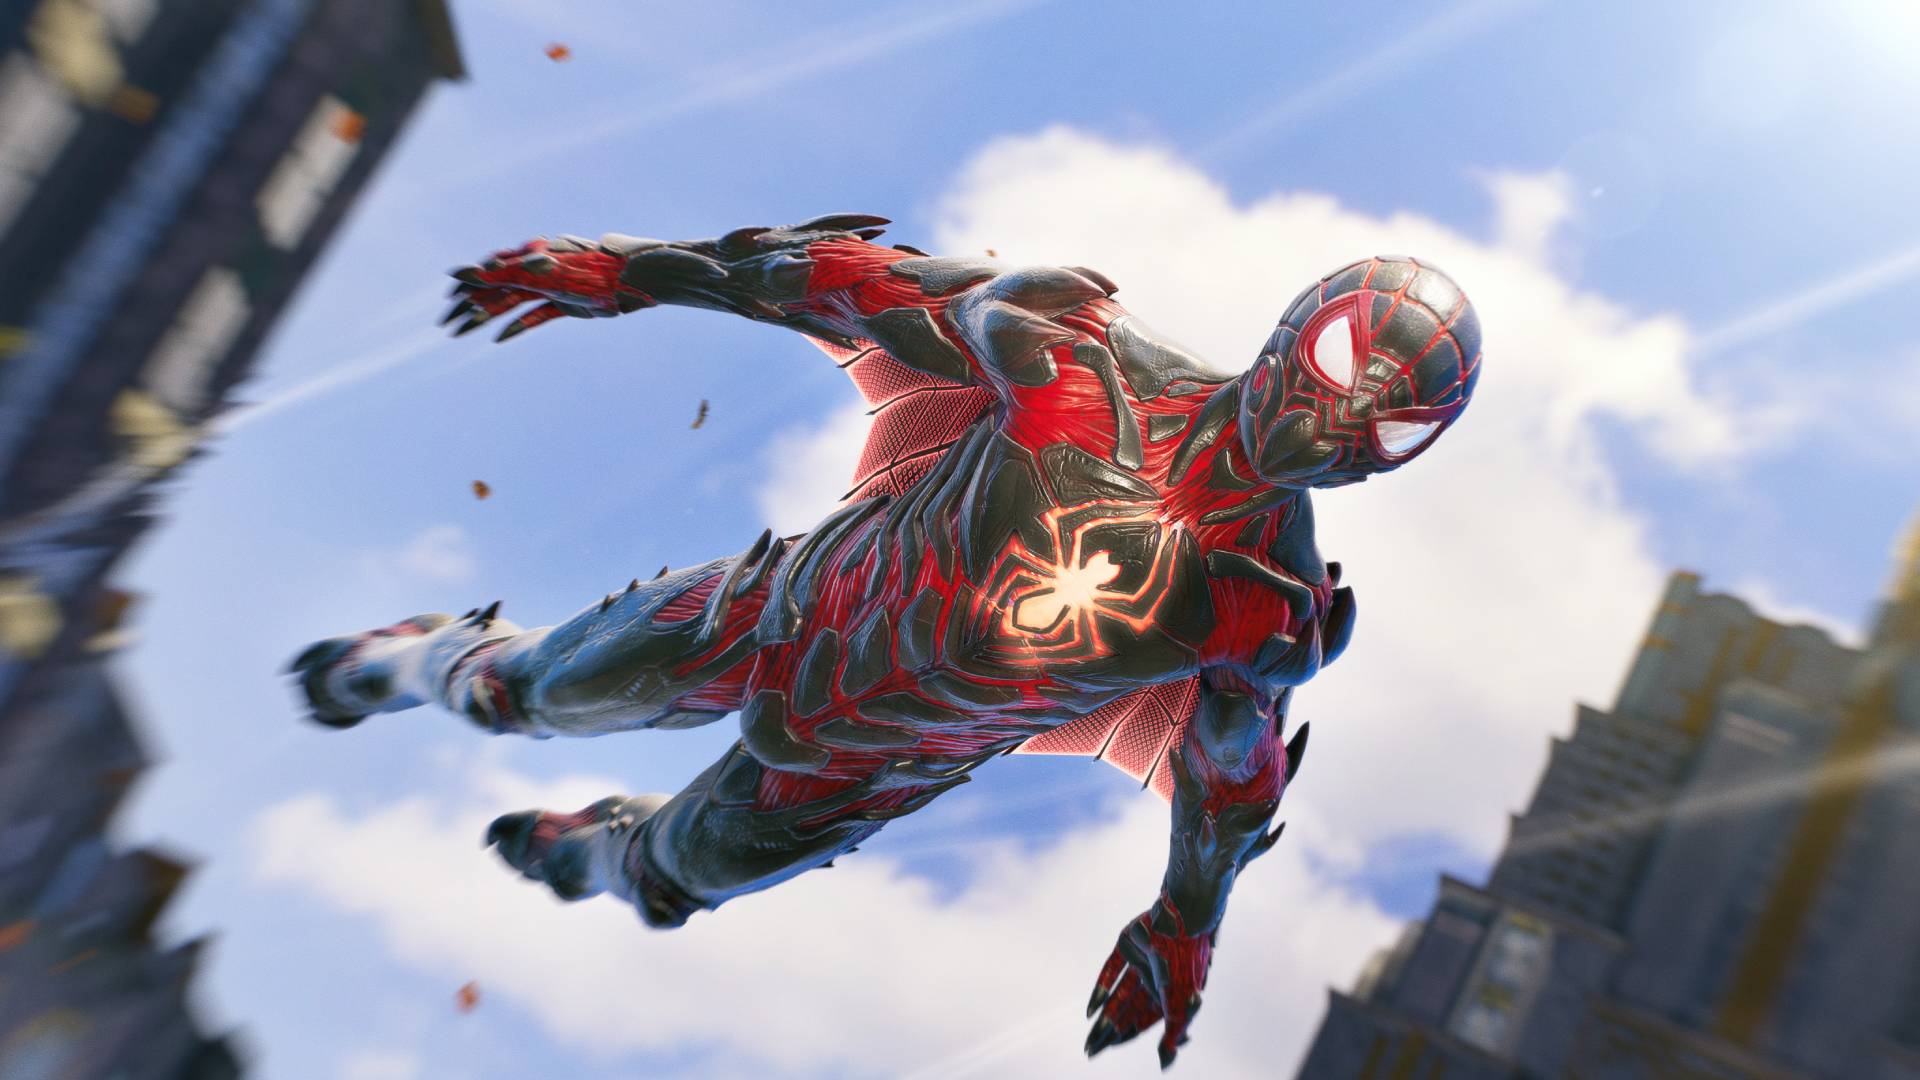 The Biomechanical Suit for Miles in Marvel's Spider-Man 2